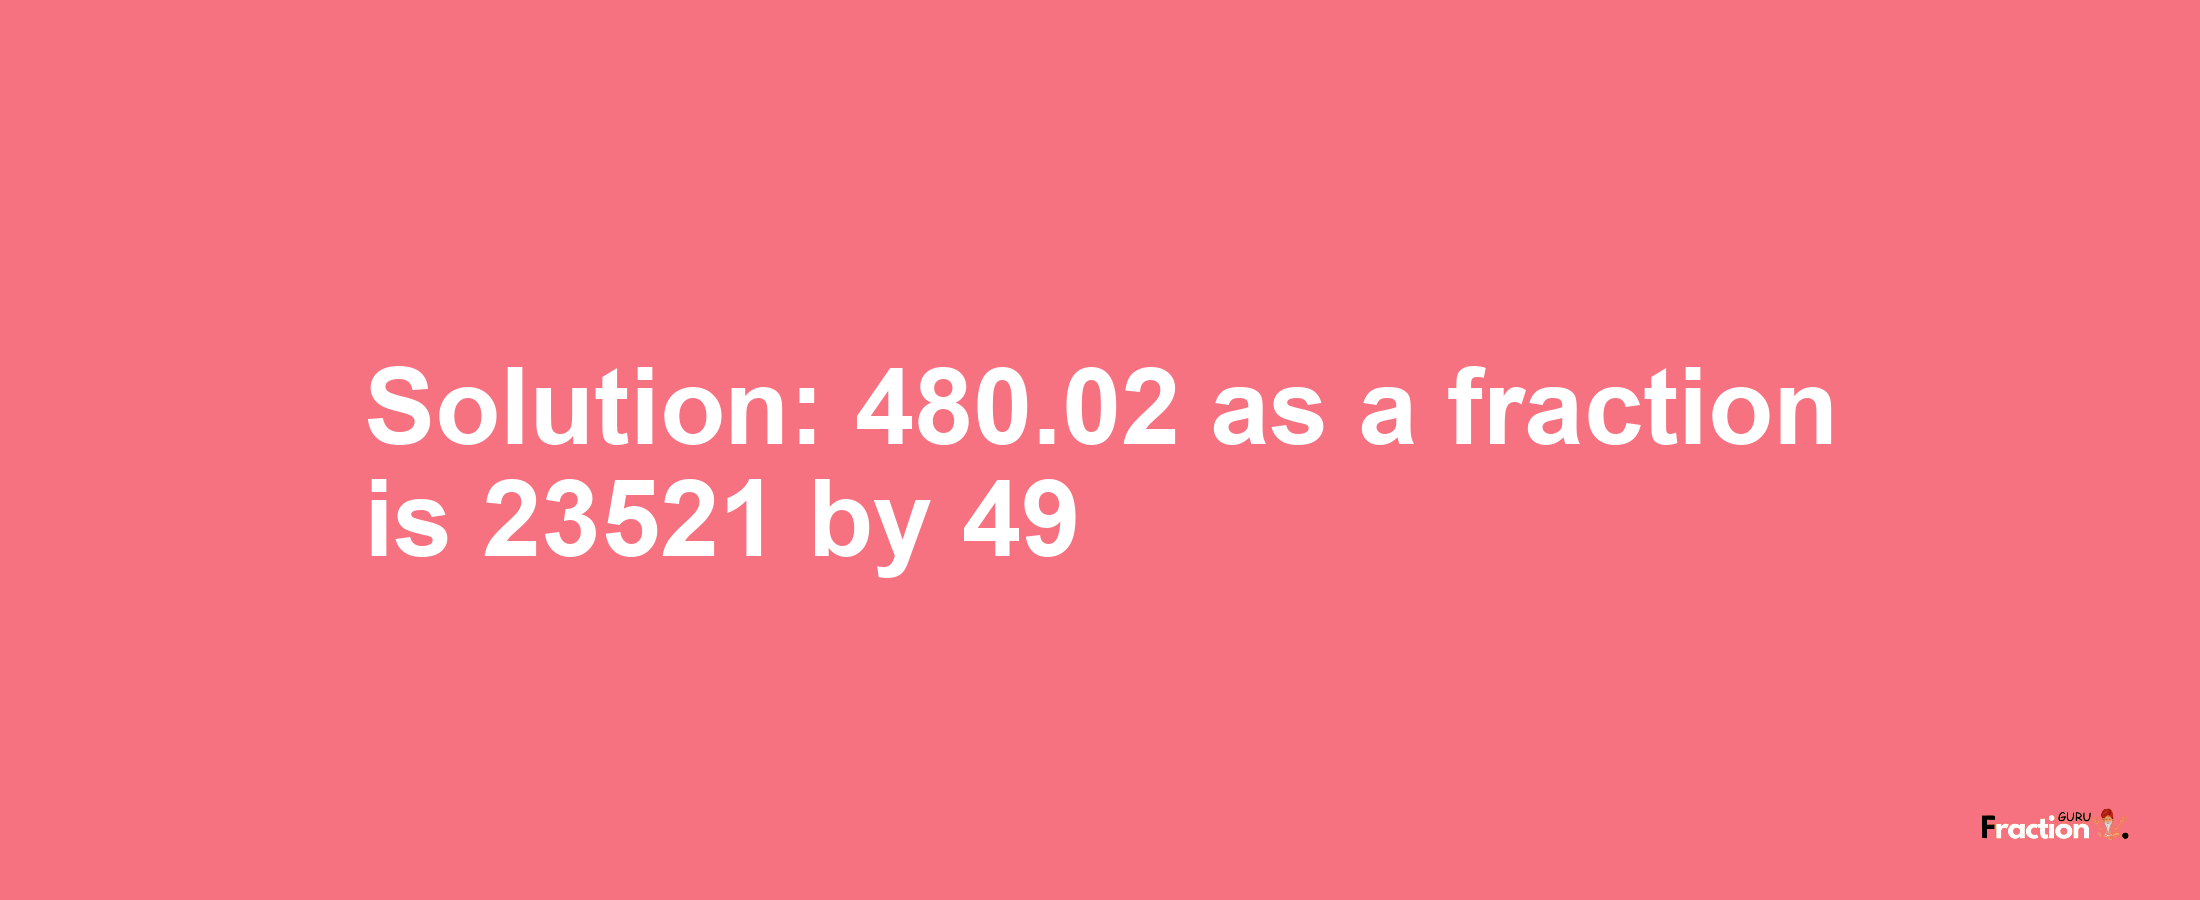 Solution:480.02 as a fraction is 23521/49